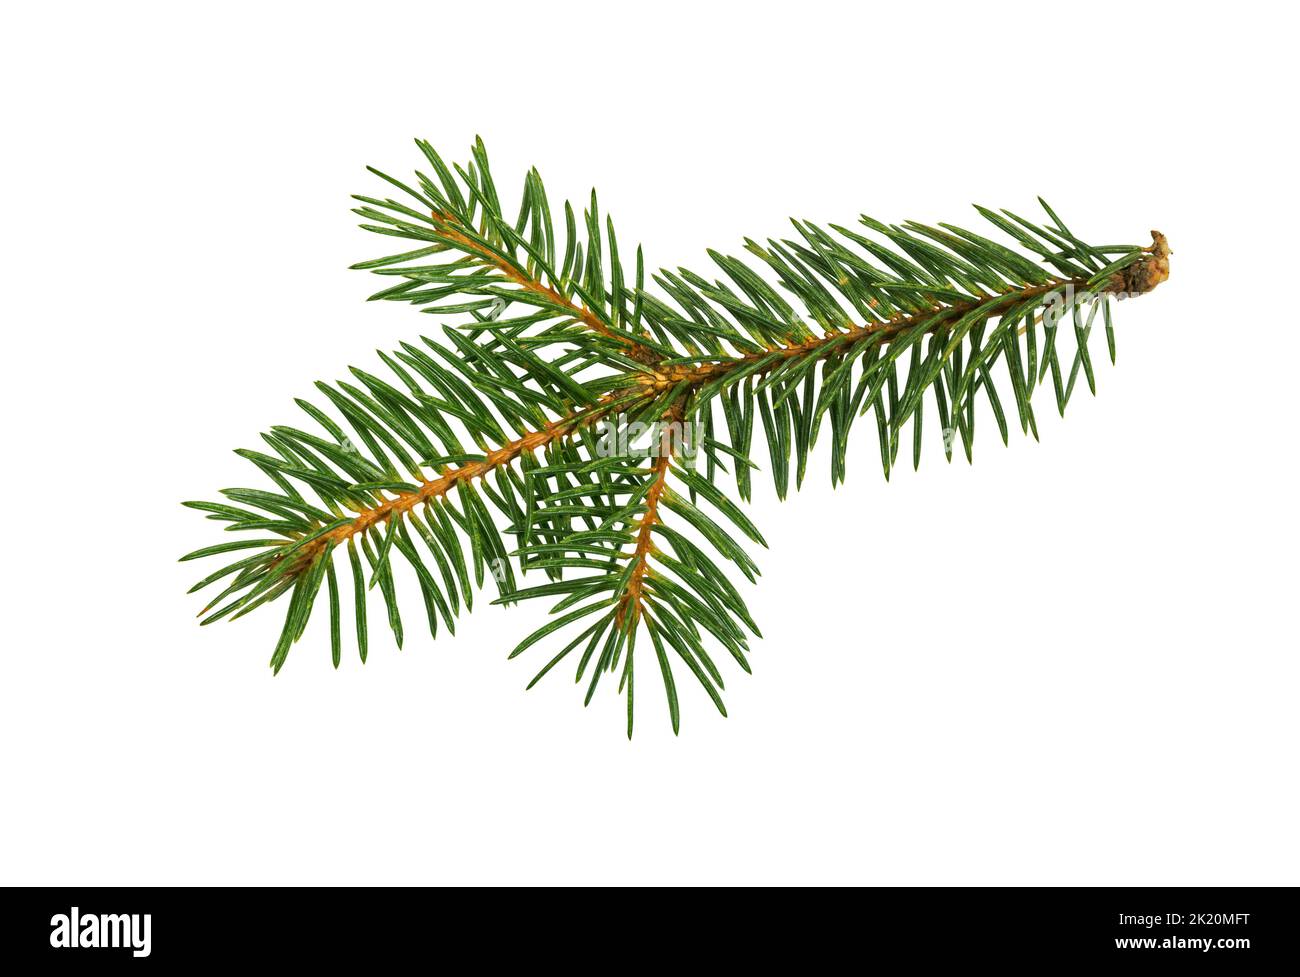 Fir tree branch isolated on white background. Pine branch. Stock Photo